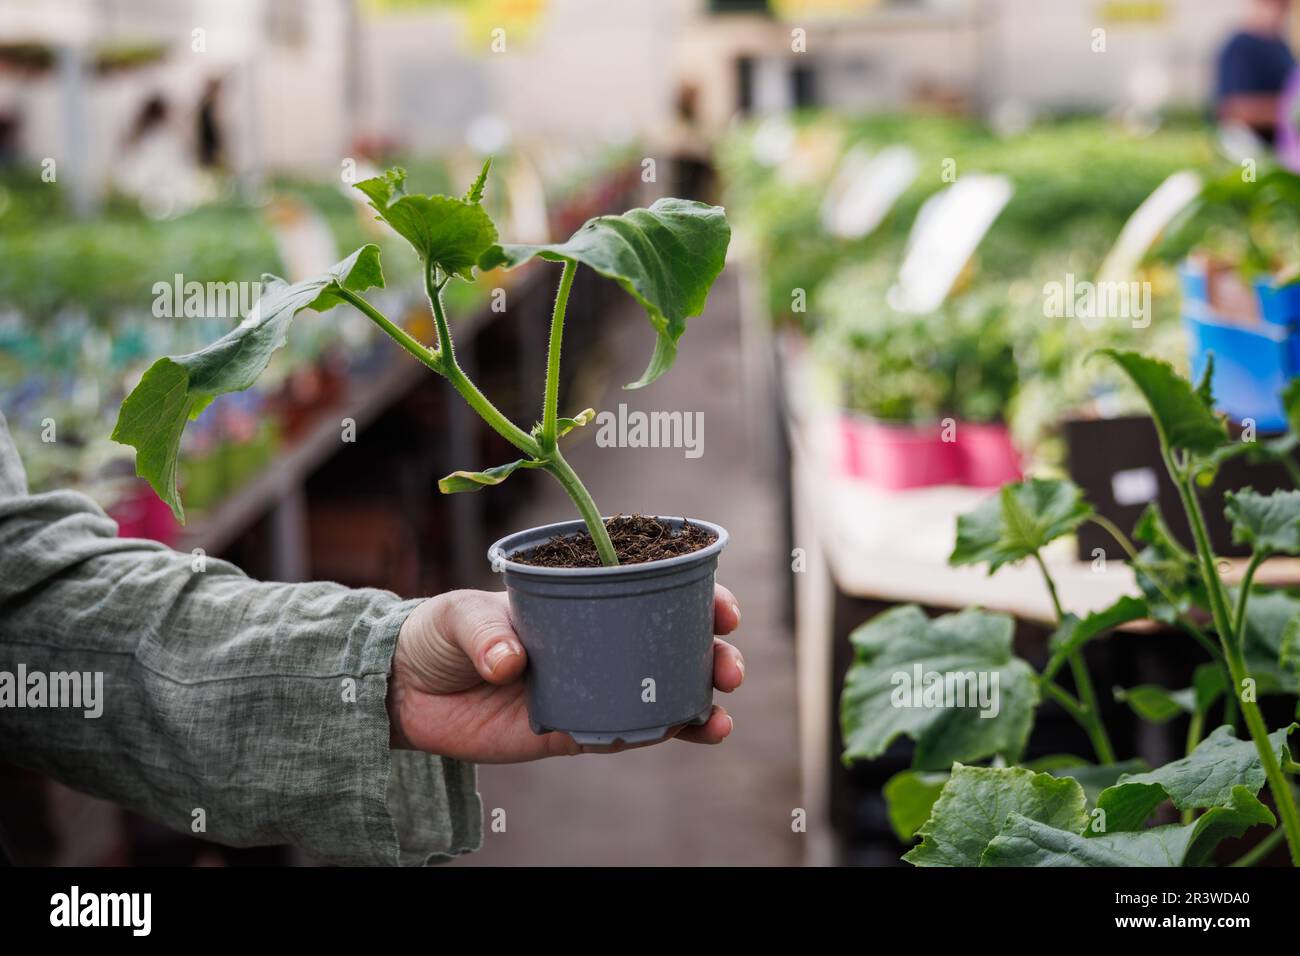 Cucumber seedling in hand. Woman shopping vegetable plant in garden center Stock Photo